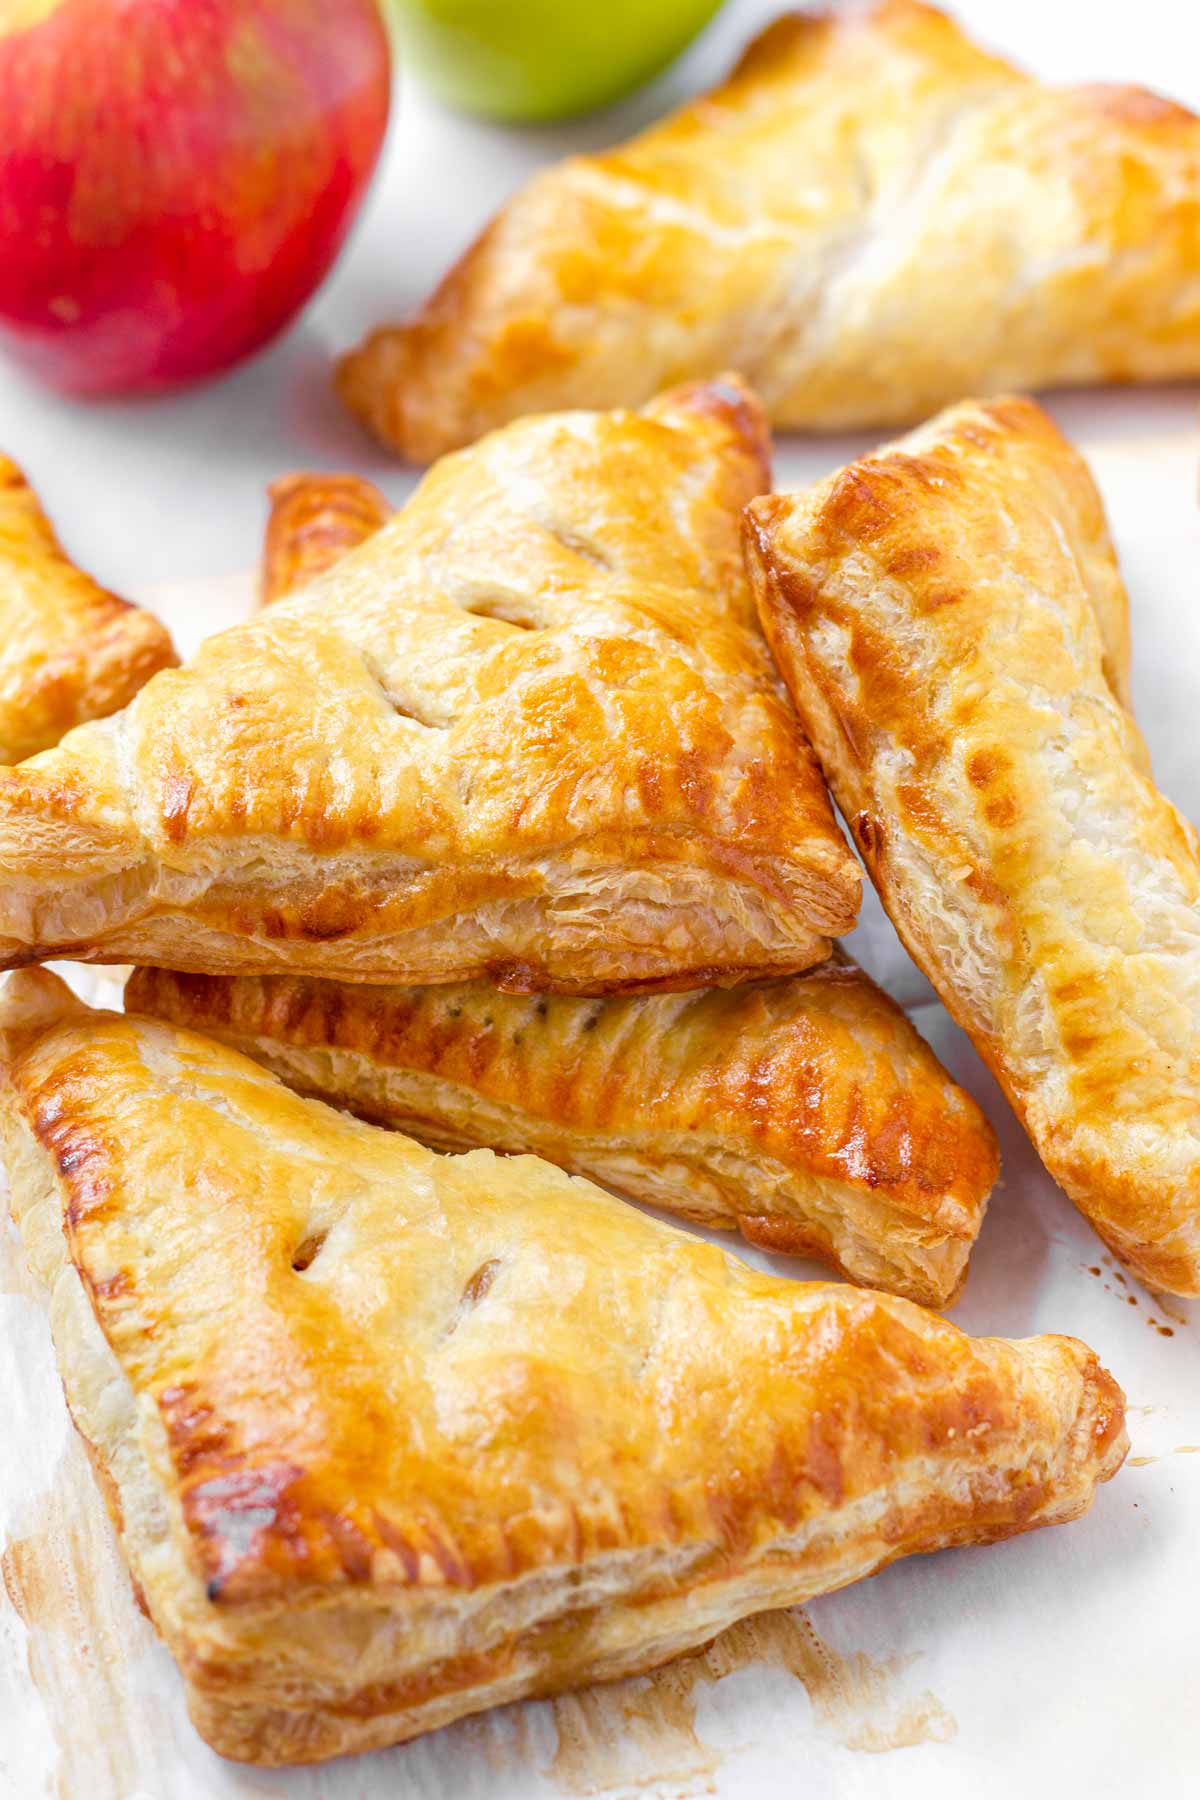 Homemade Apple Turnovers (From Scratch!)